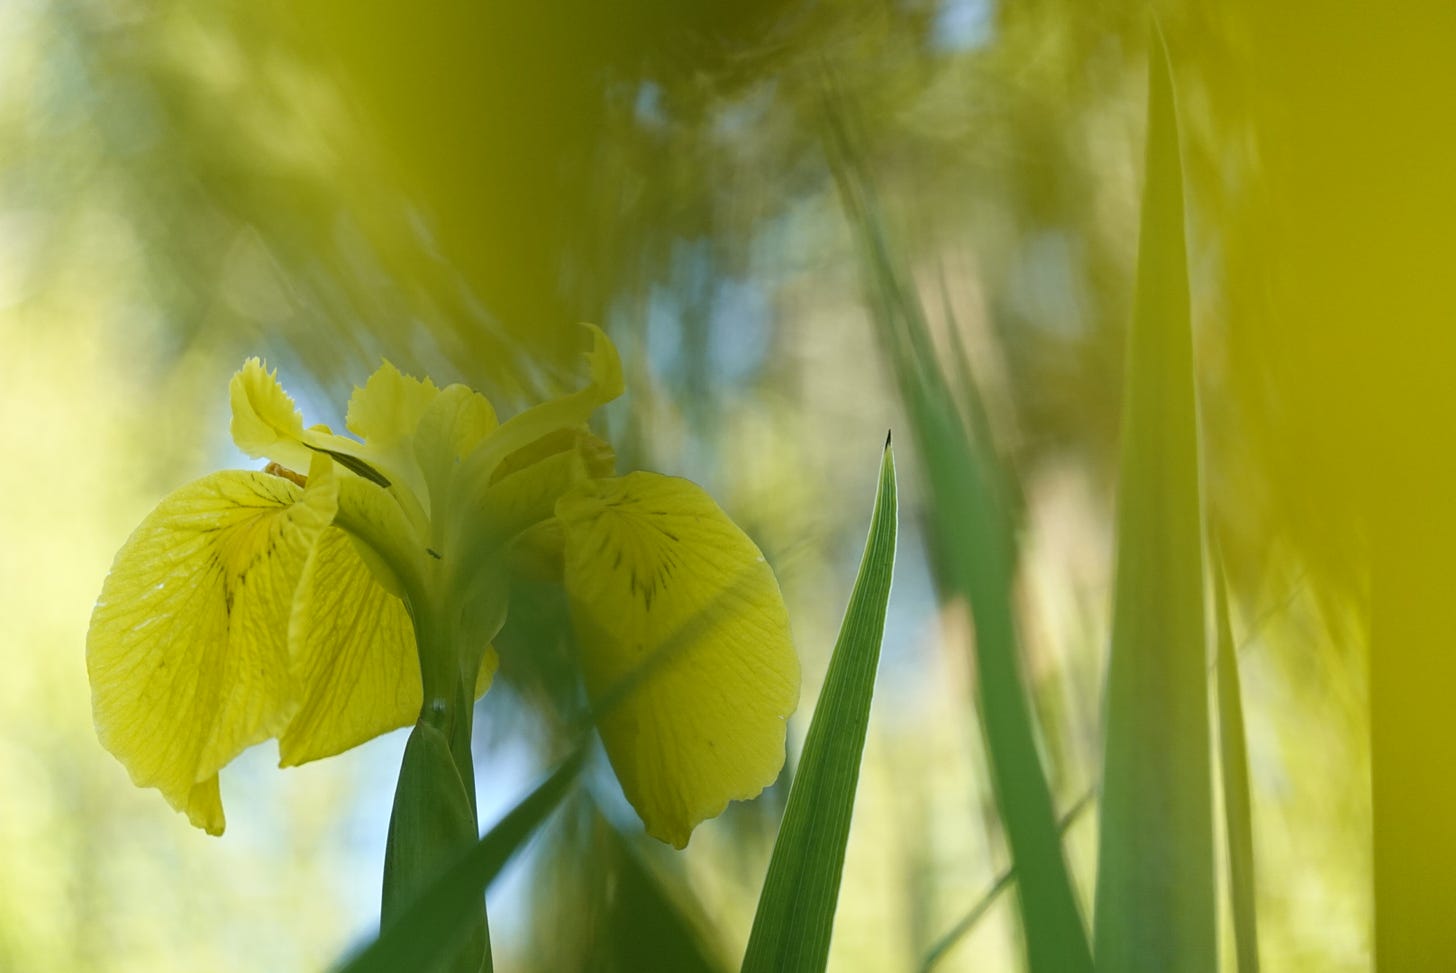 Low level and close up view of the flower and leaves of yellow flag iris (Iris pseudacorus)